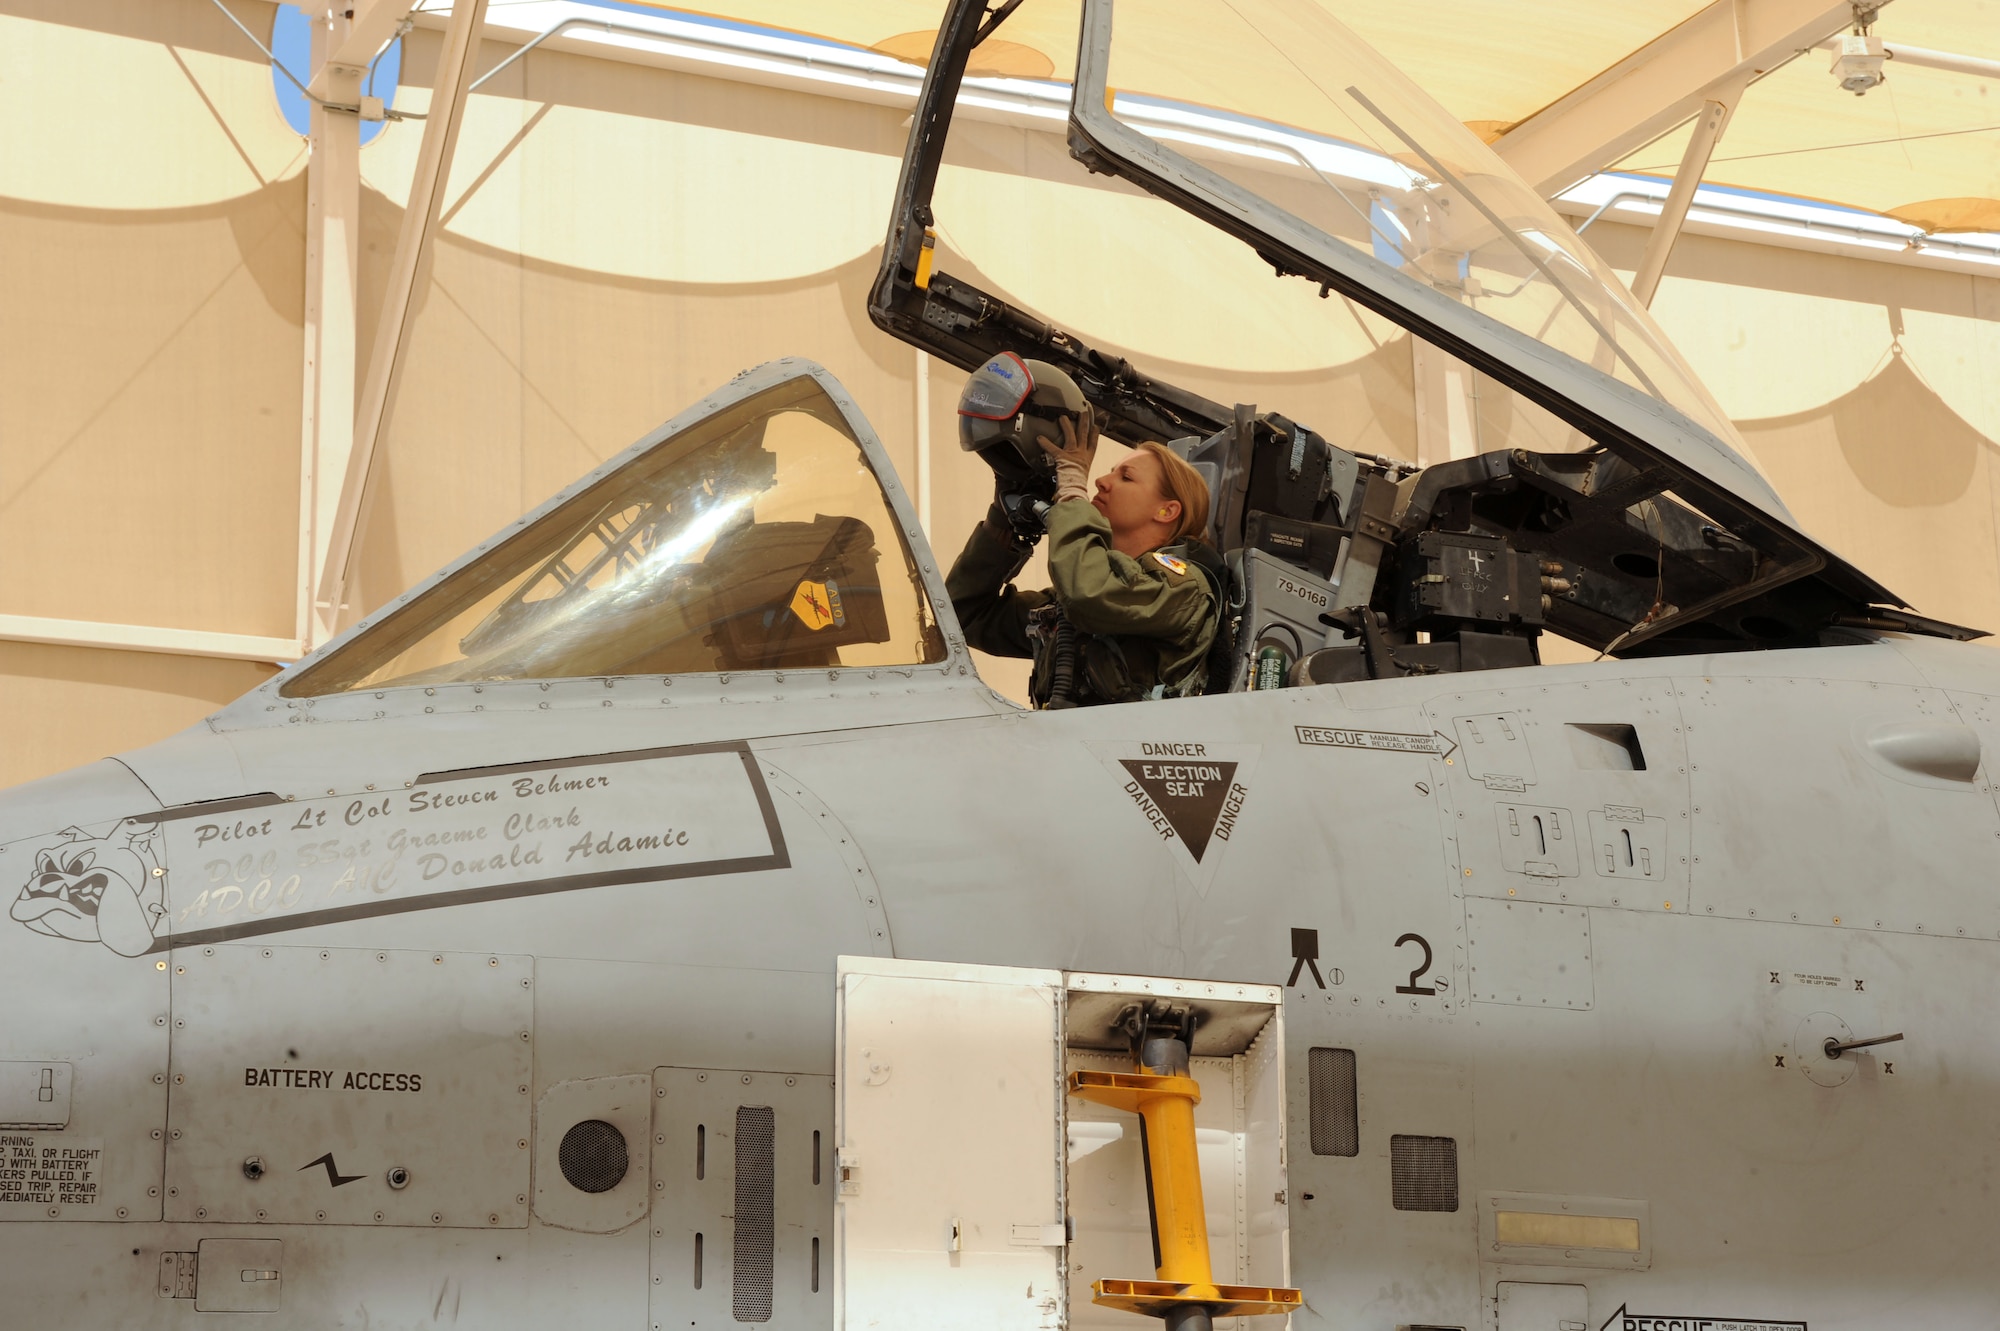 U.S. Air Force Capt. Kelly Nettleblad, 354th Fighter Squadron A-10 pilot, puts on her flight helmet in preparation for her final flight at Davis-Monthan Air Force Base, Ariz., May 5, 2014. For Nettleblad’s  fini flight, she departed D-M in an all-female four ship. (U.S. Air Force photo be Airman 1st Class Cheyenne Morigeau/Released)